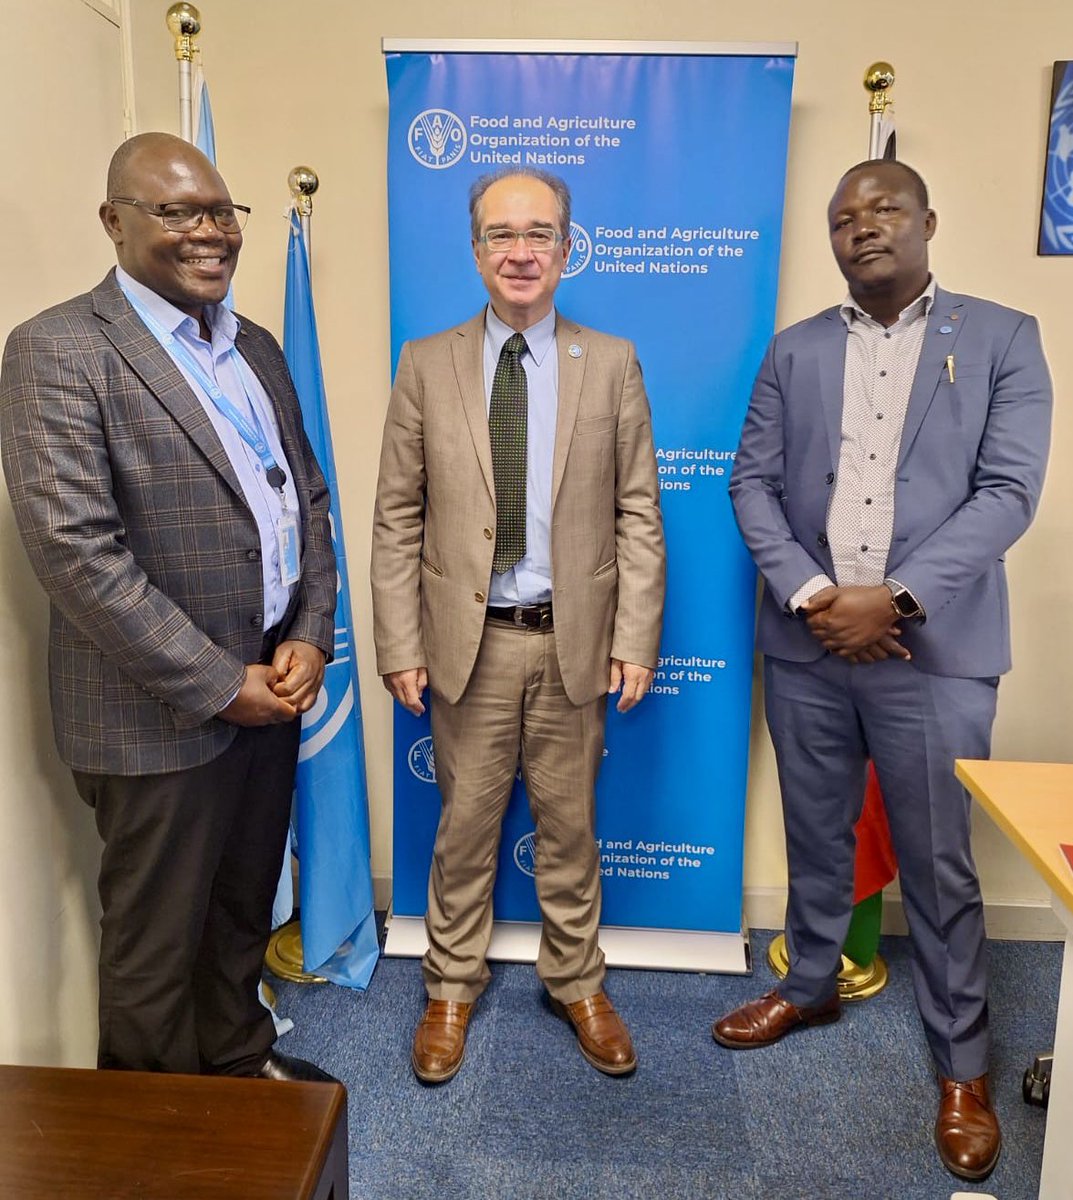 The UN Head of Food Systems Coordination Hub @stefanosfotiou paid a courtesy call to @FAOKenya & was hosted by @HamisiWilliams. They discussed the progress of food systems transformation in Kenya.